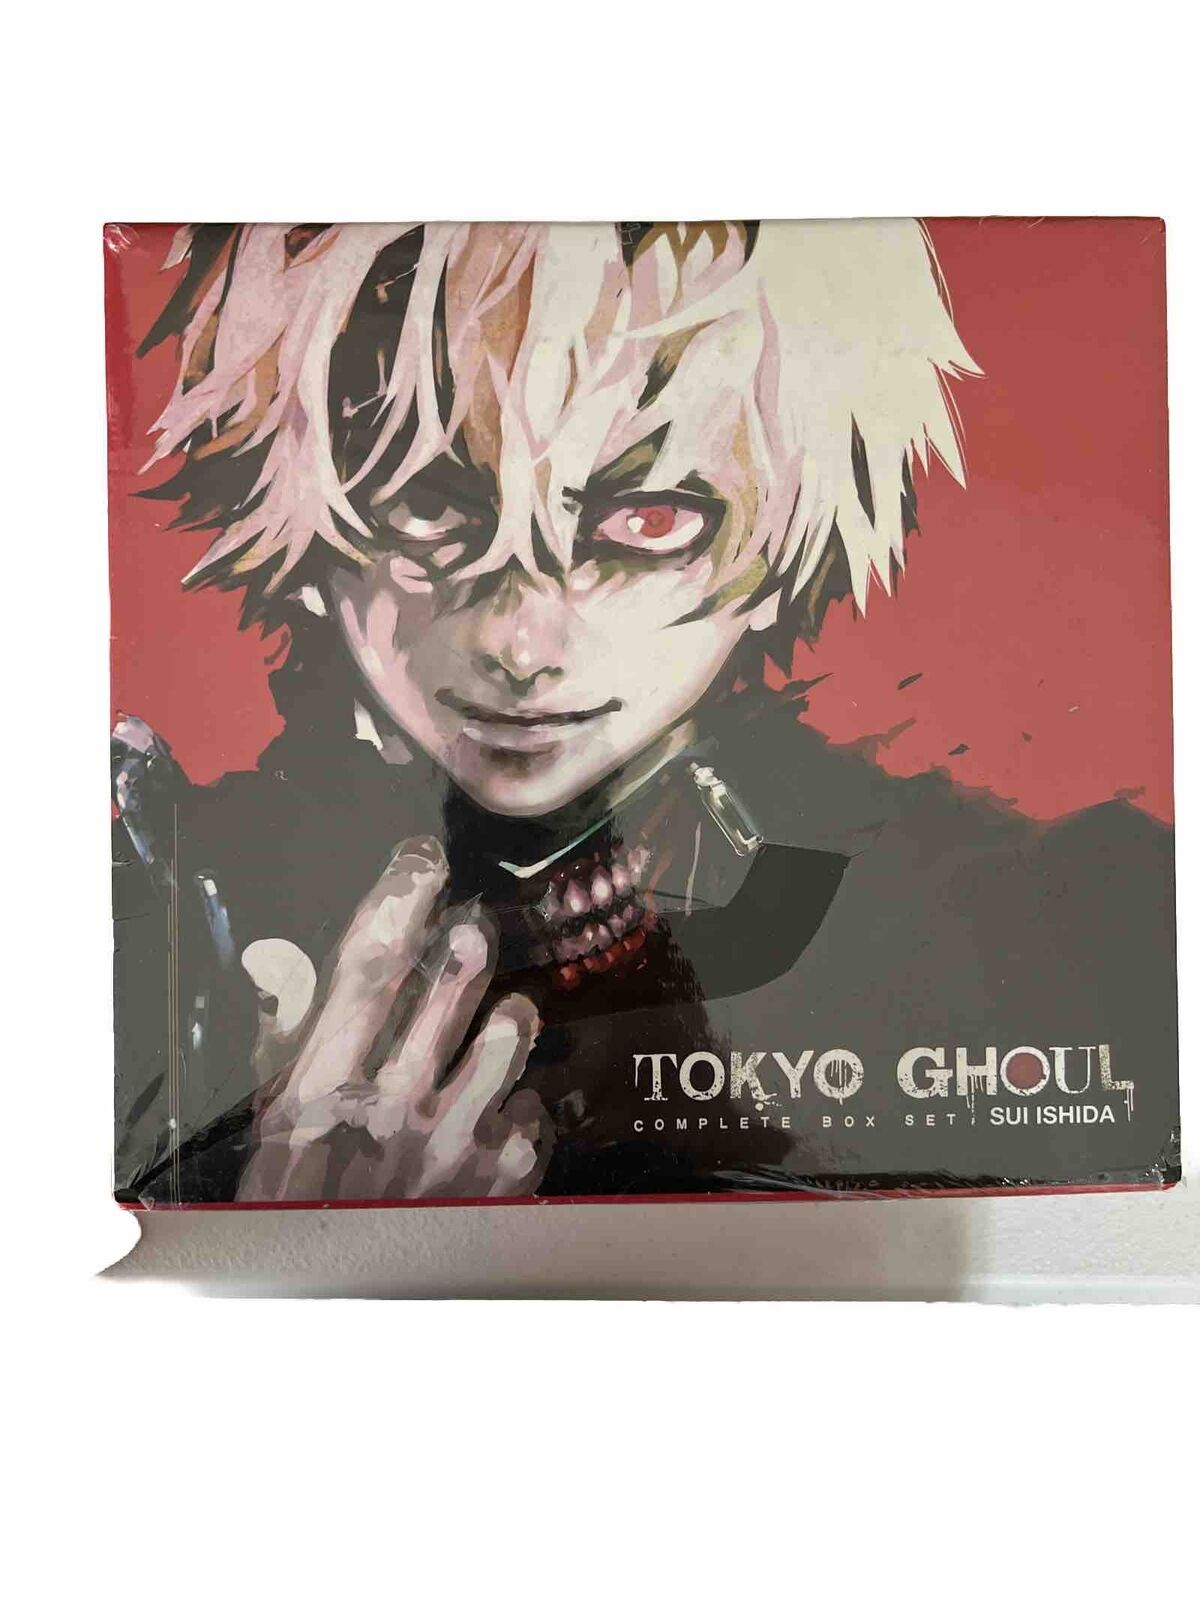 Tokyo Ghoul Complete Box Set Includes Vols. 1-14 with Premium (Paperback)